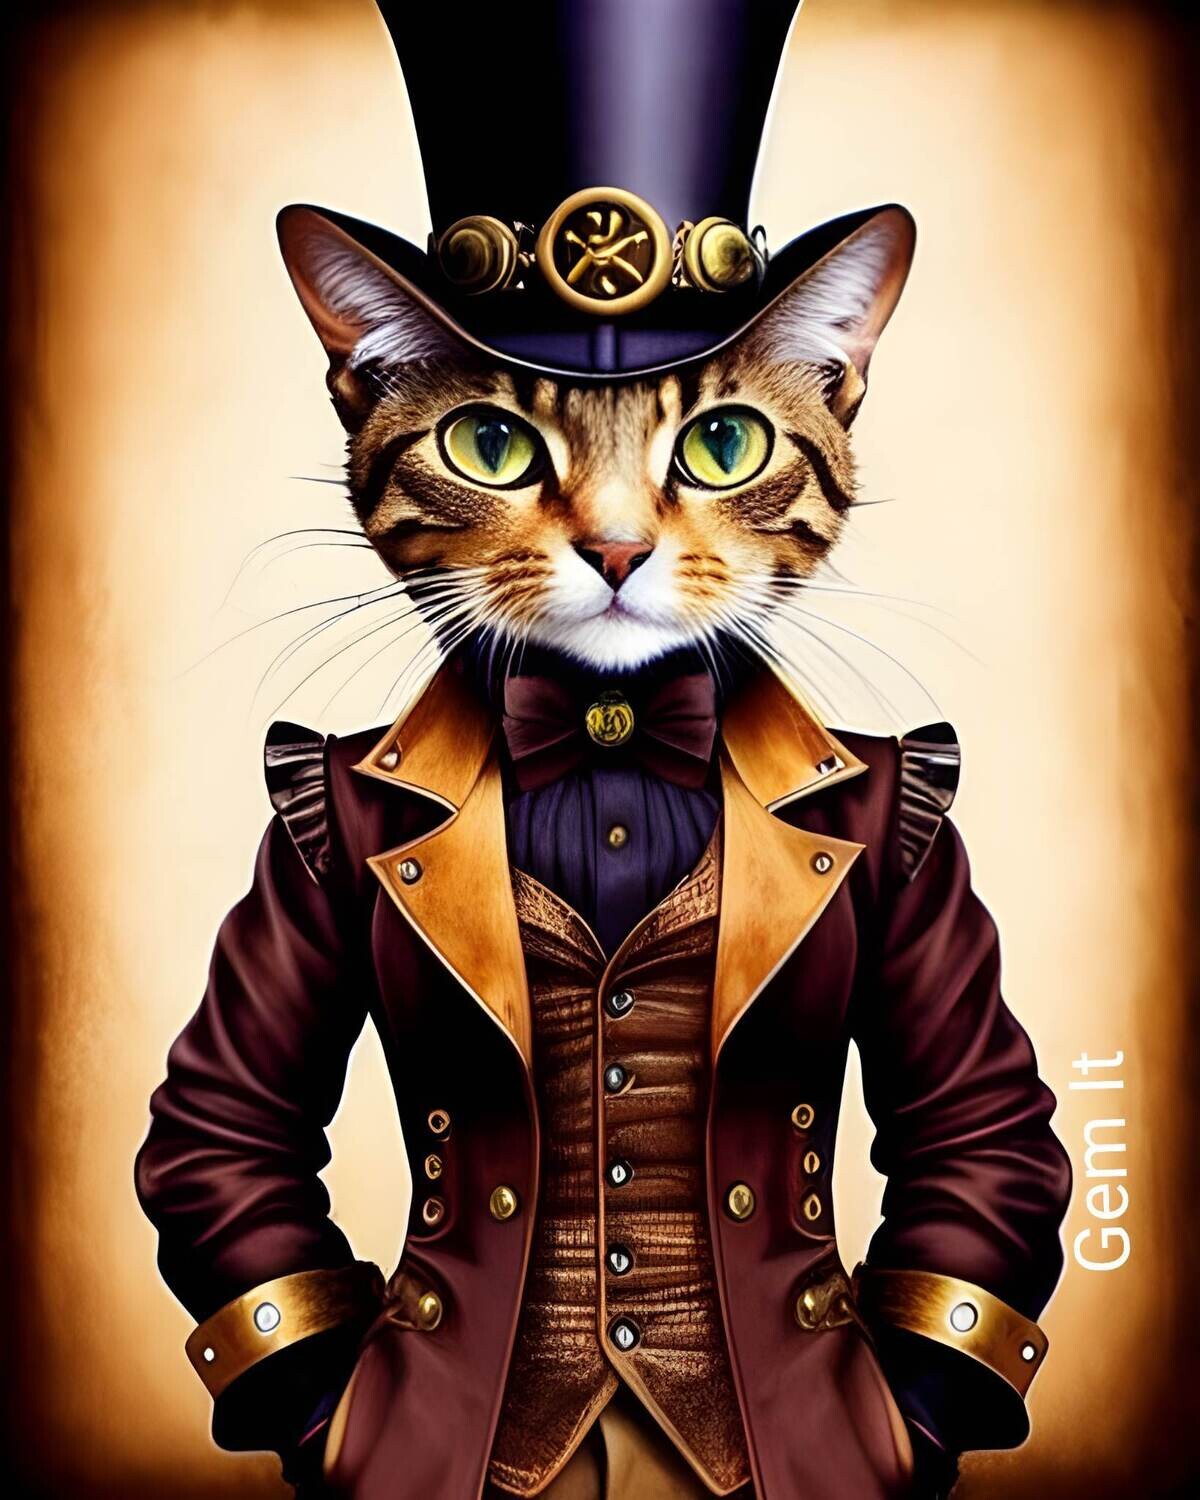 Steampunk Cat - Specially ordered for you. Delivery is approximately 4 - 6 weeks.